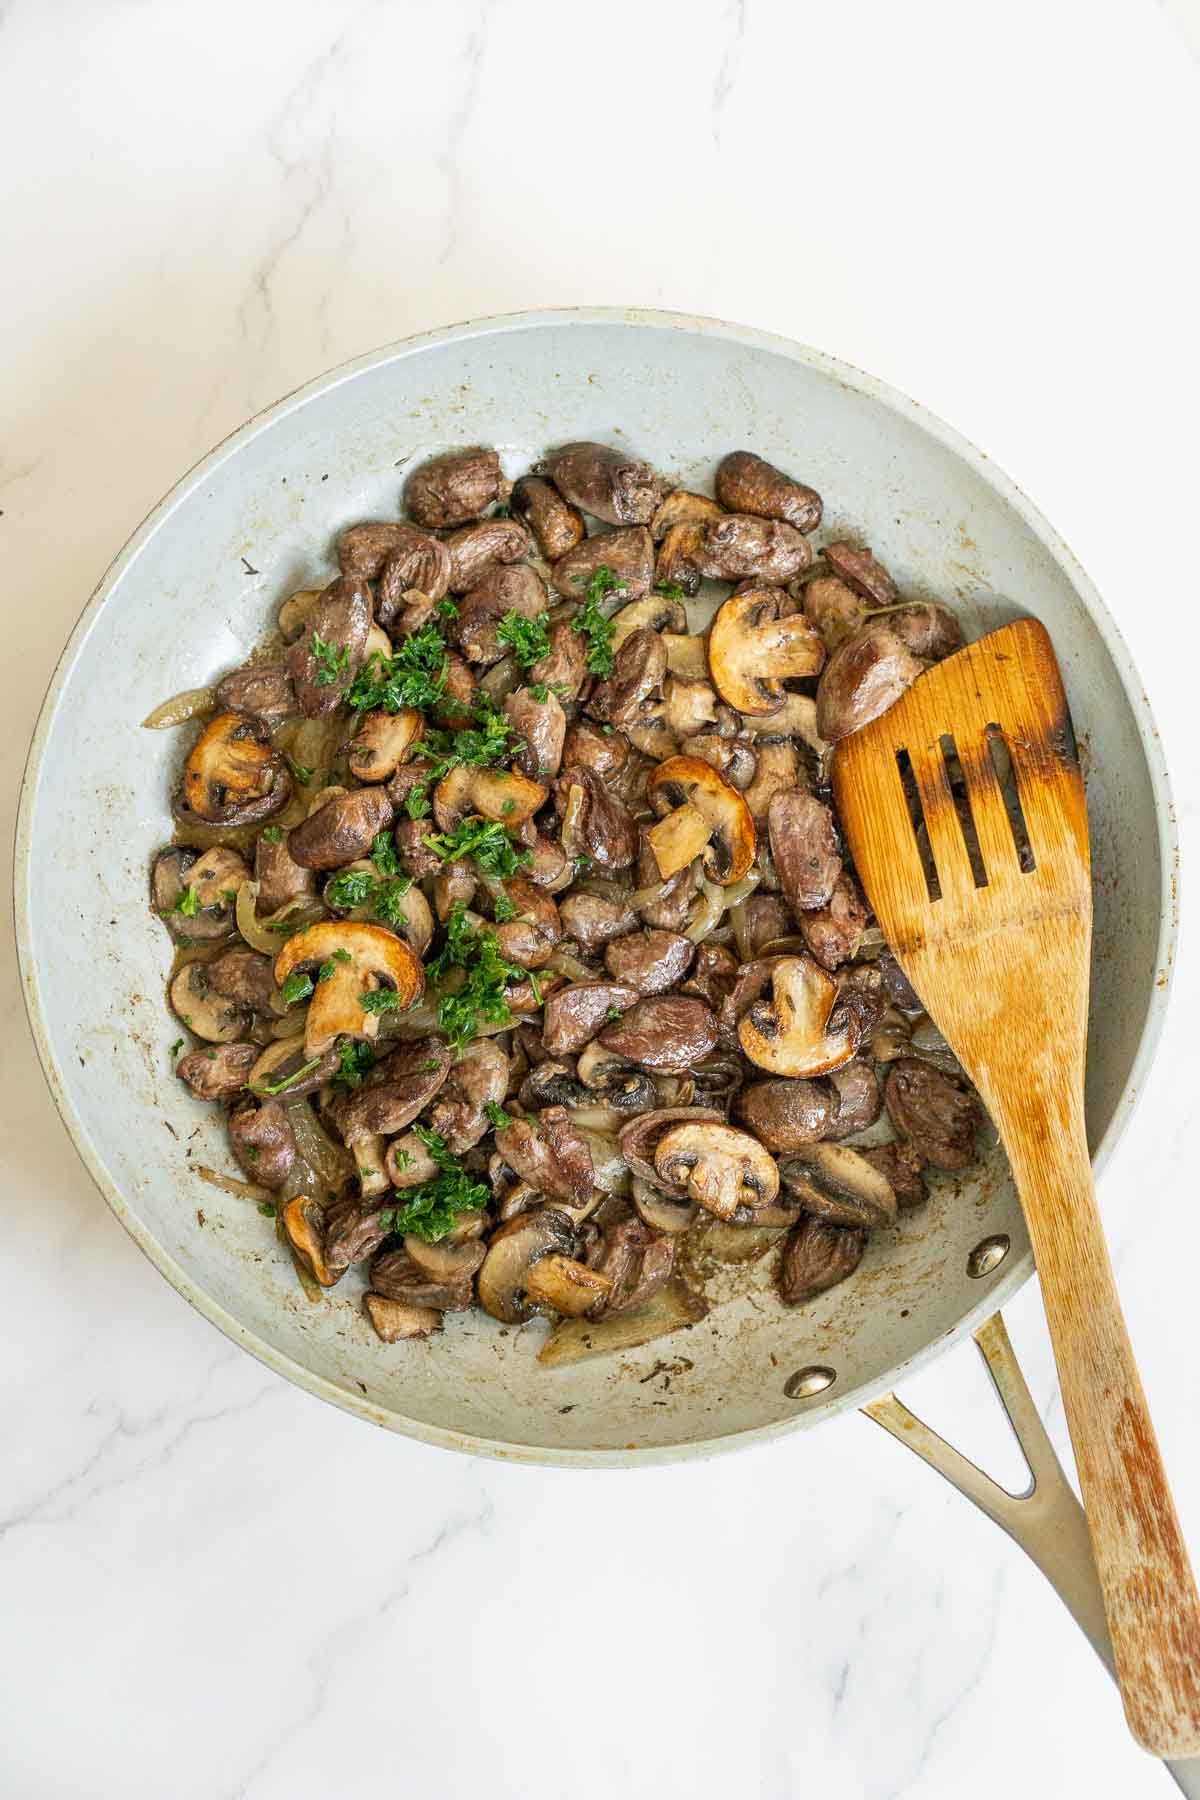 Chicken hearts and mushrooms on a skillet garnished with parsley.